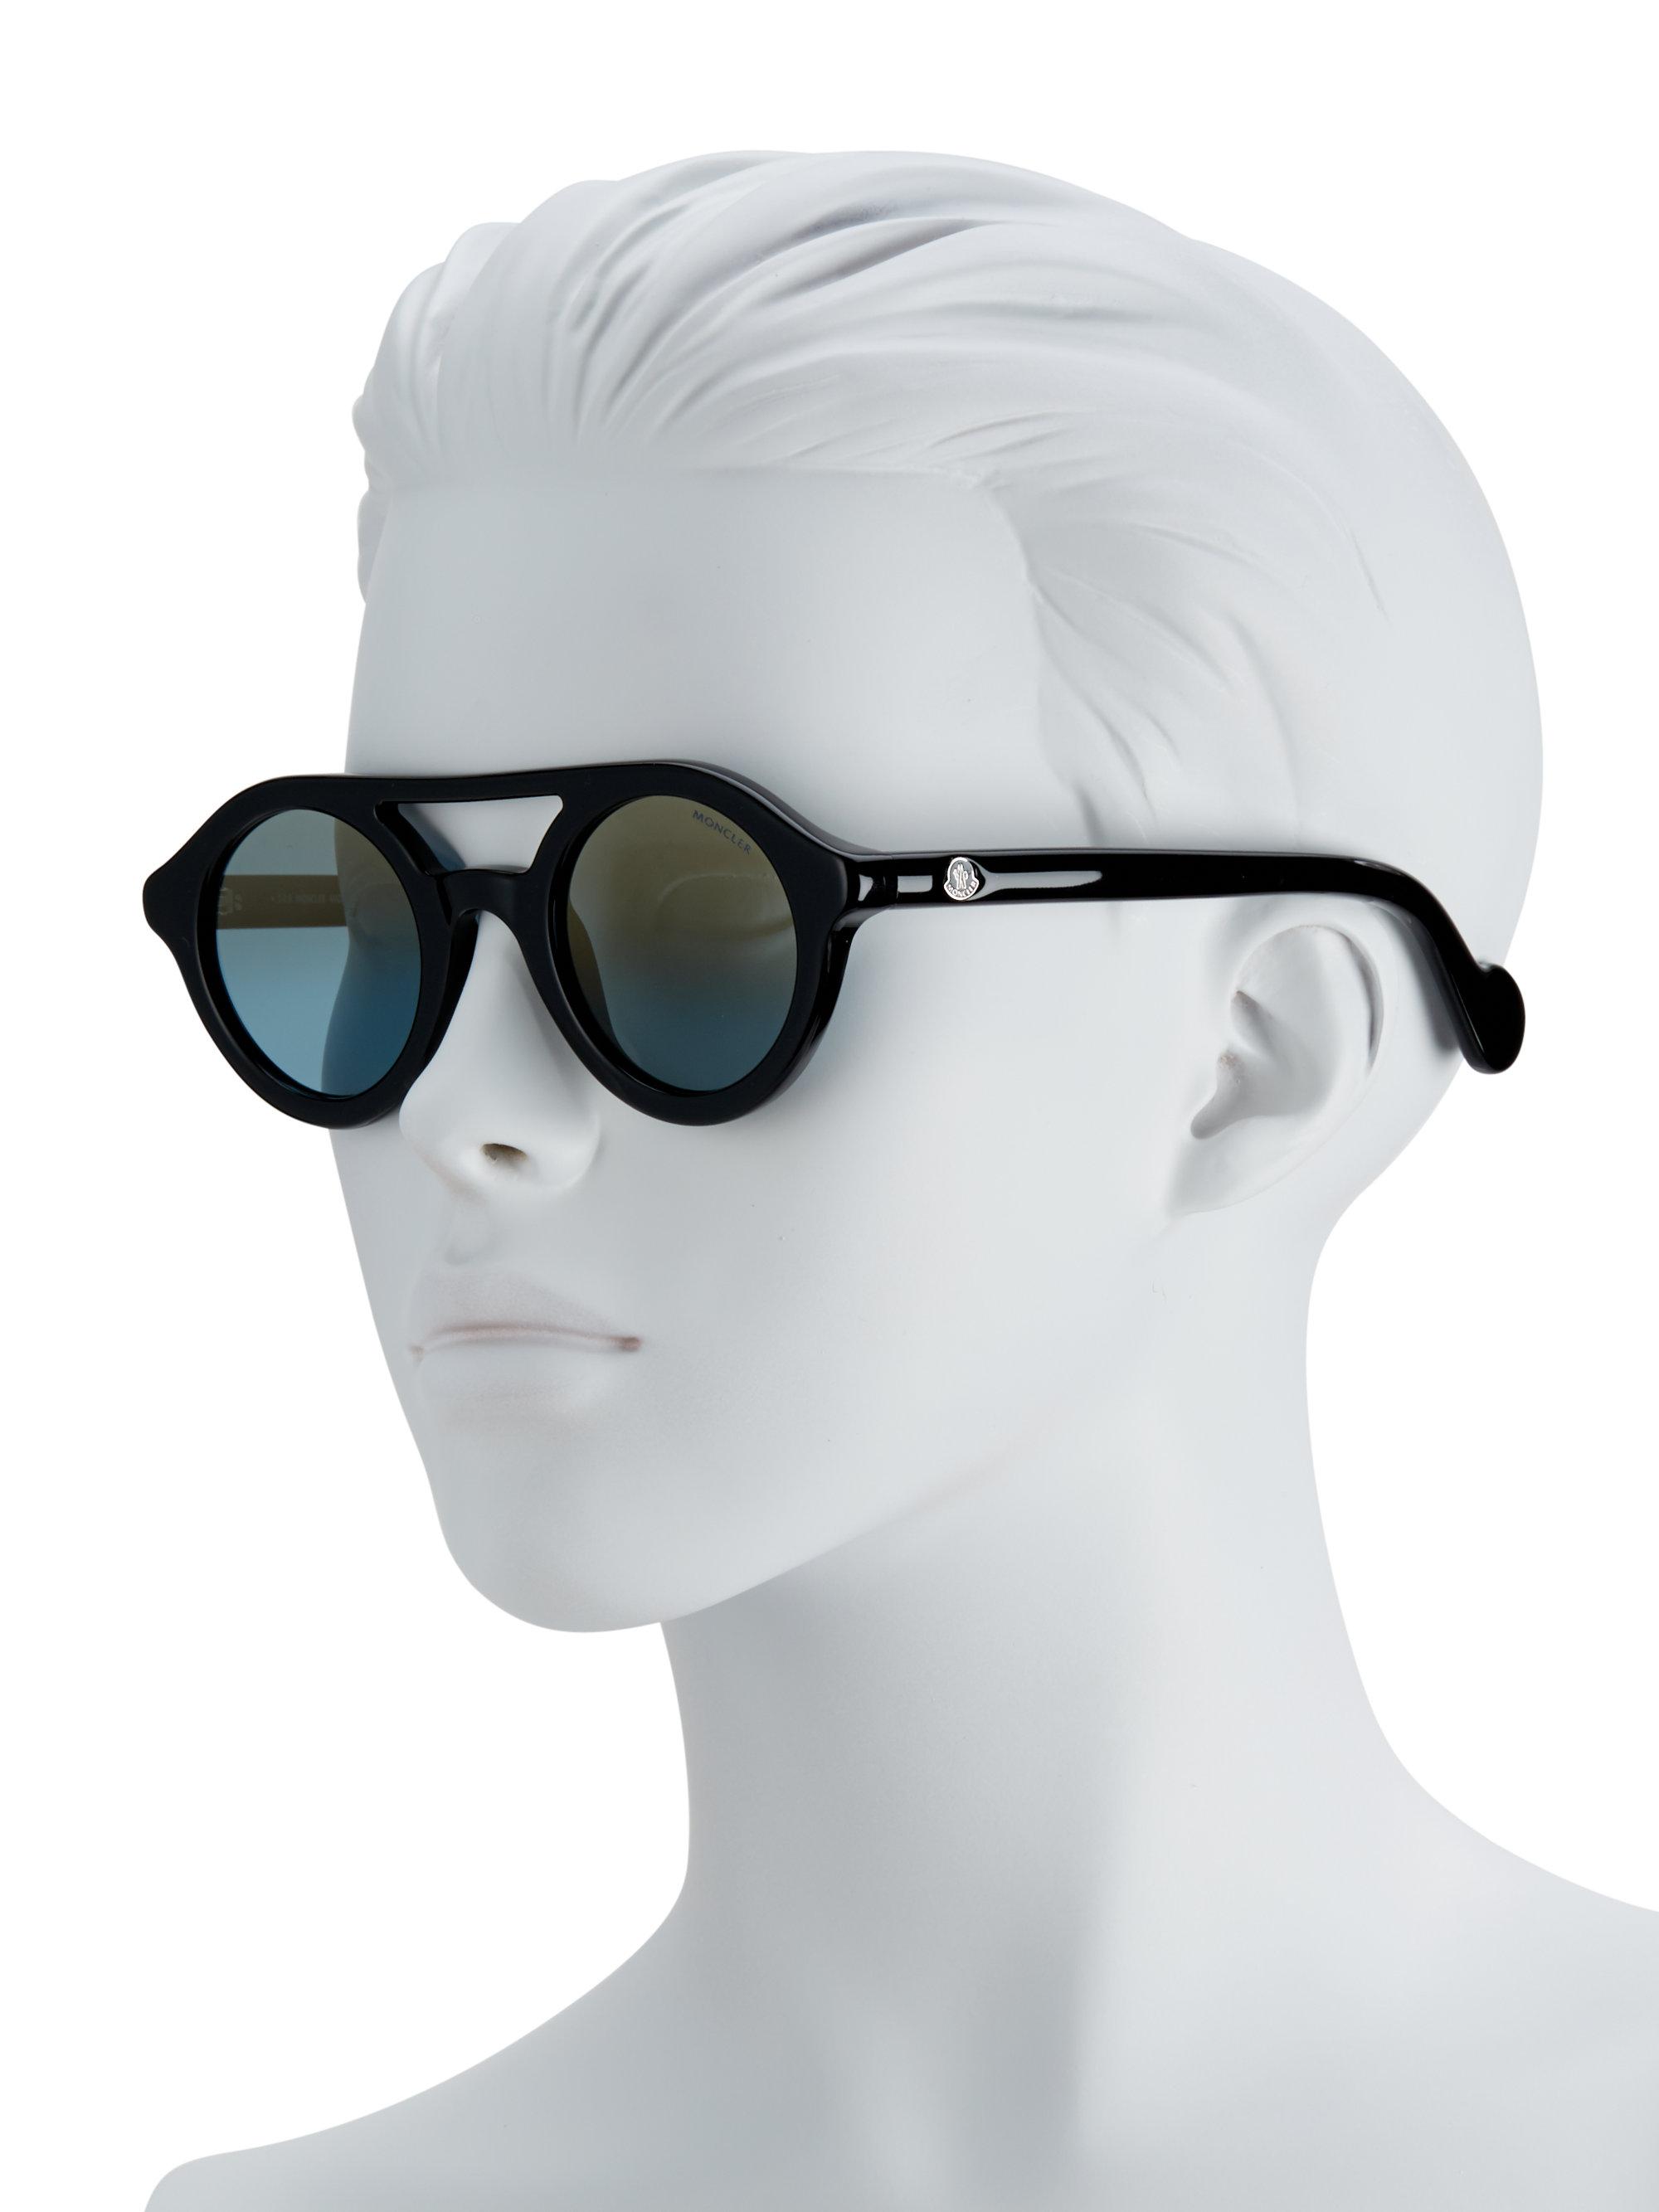 Moncler 47mm Round Mirrored Sunglasses in Black-Blue (Black) - Lyst